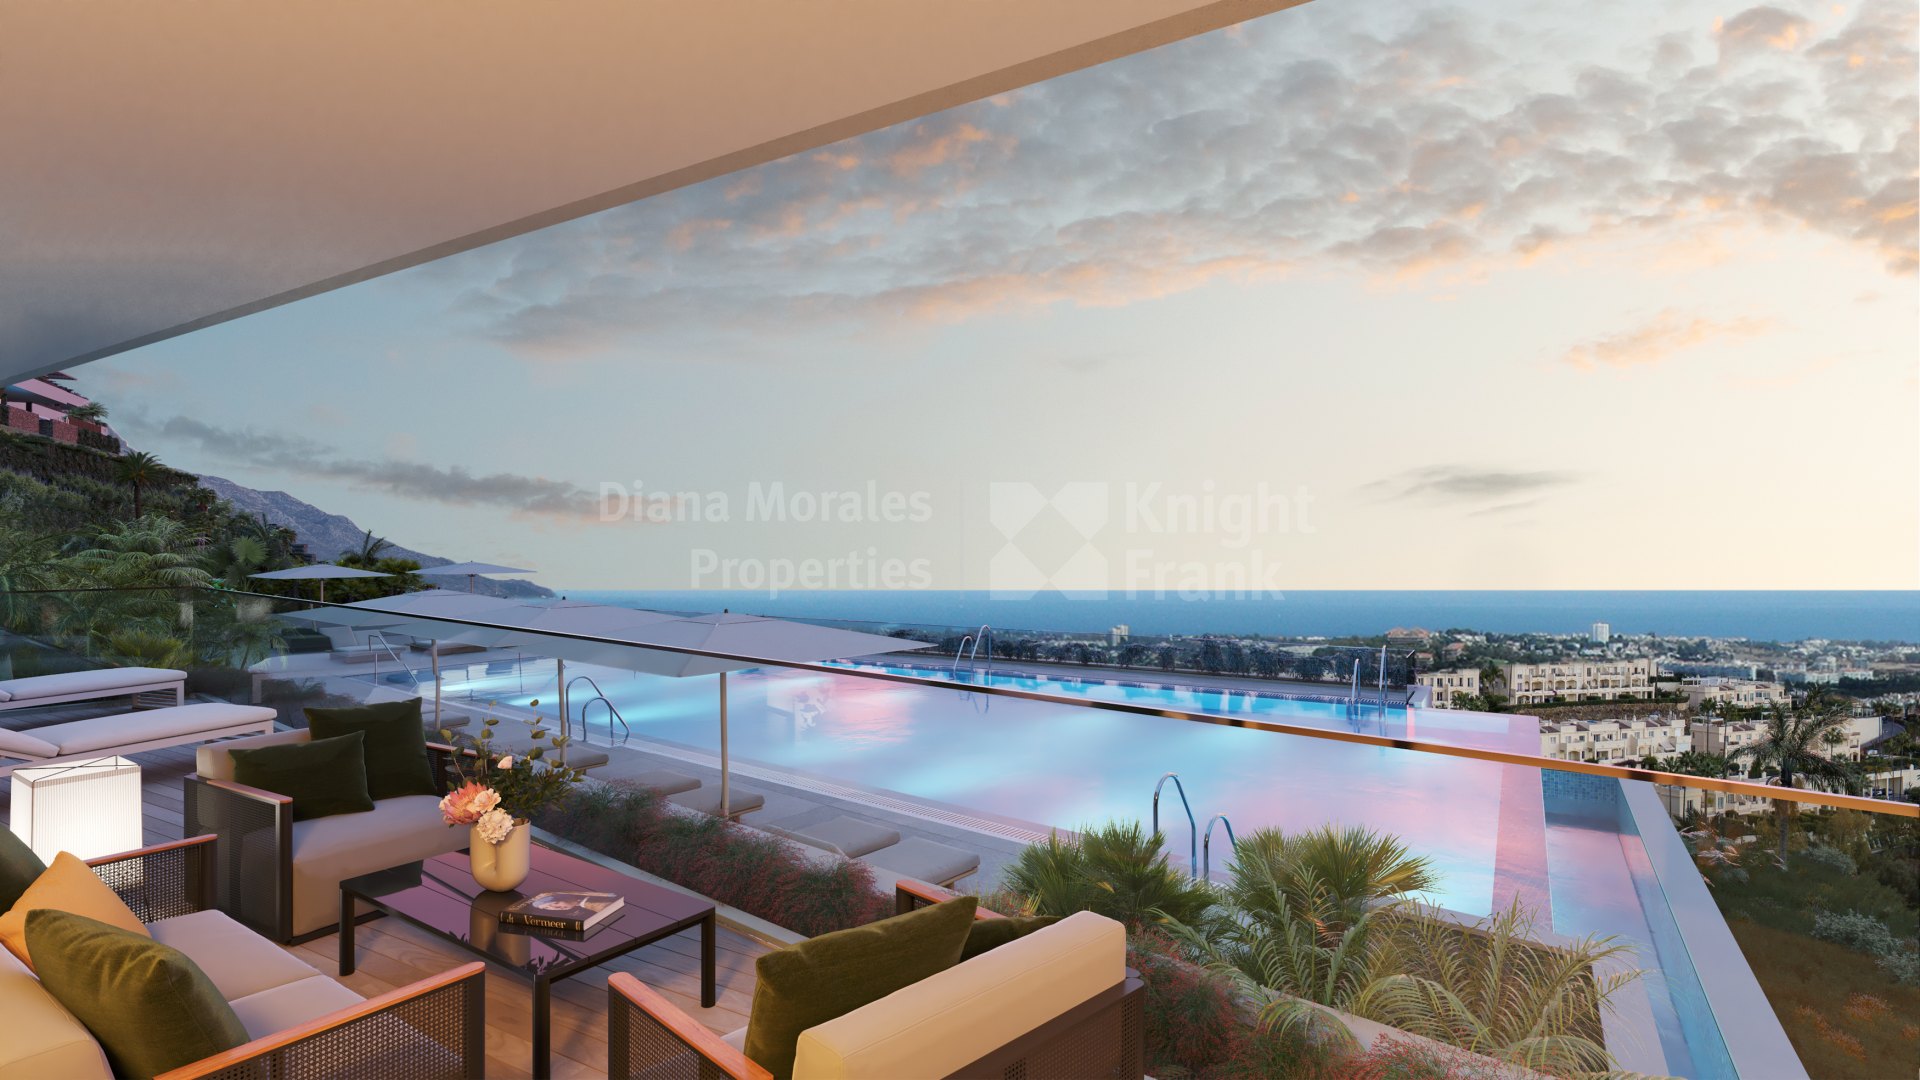 Las Colinas de Marbella, Ground floor apartment with garden and private swimming pool with panoramic views